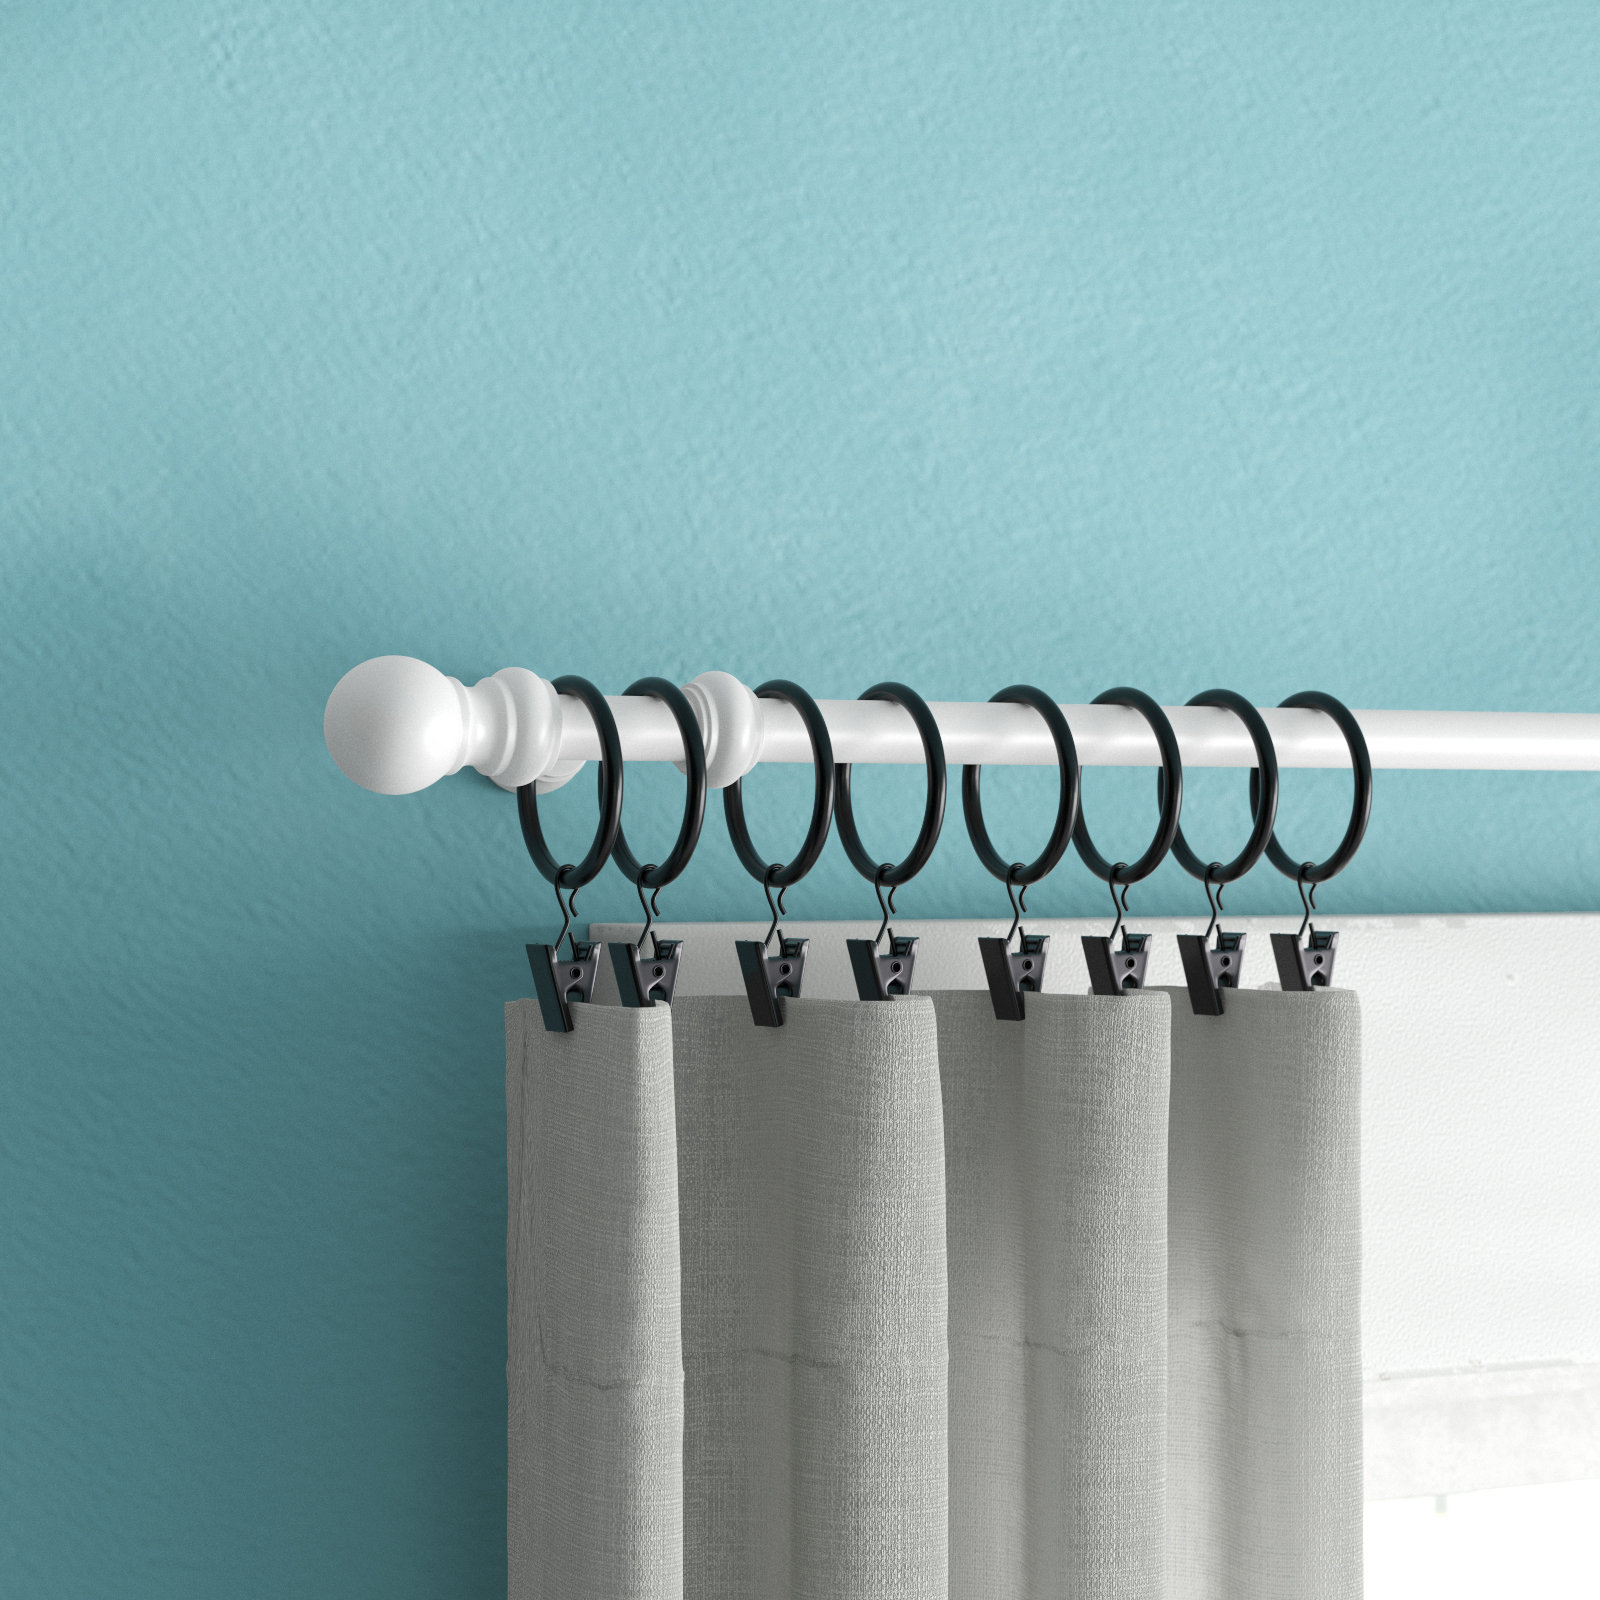 4 Ways to Use Shower Curtain Rings to Organize Your Closet - LIFE,  CREATIVELY ORGANIZED